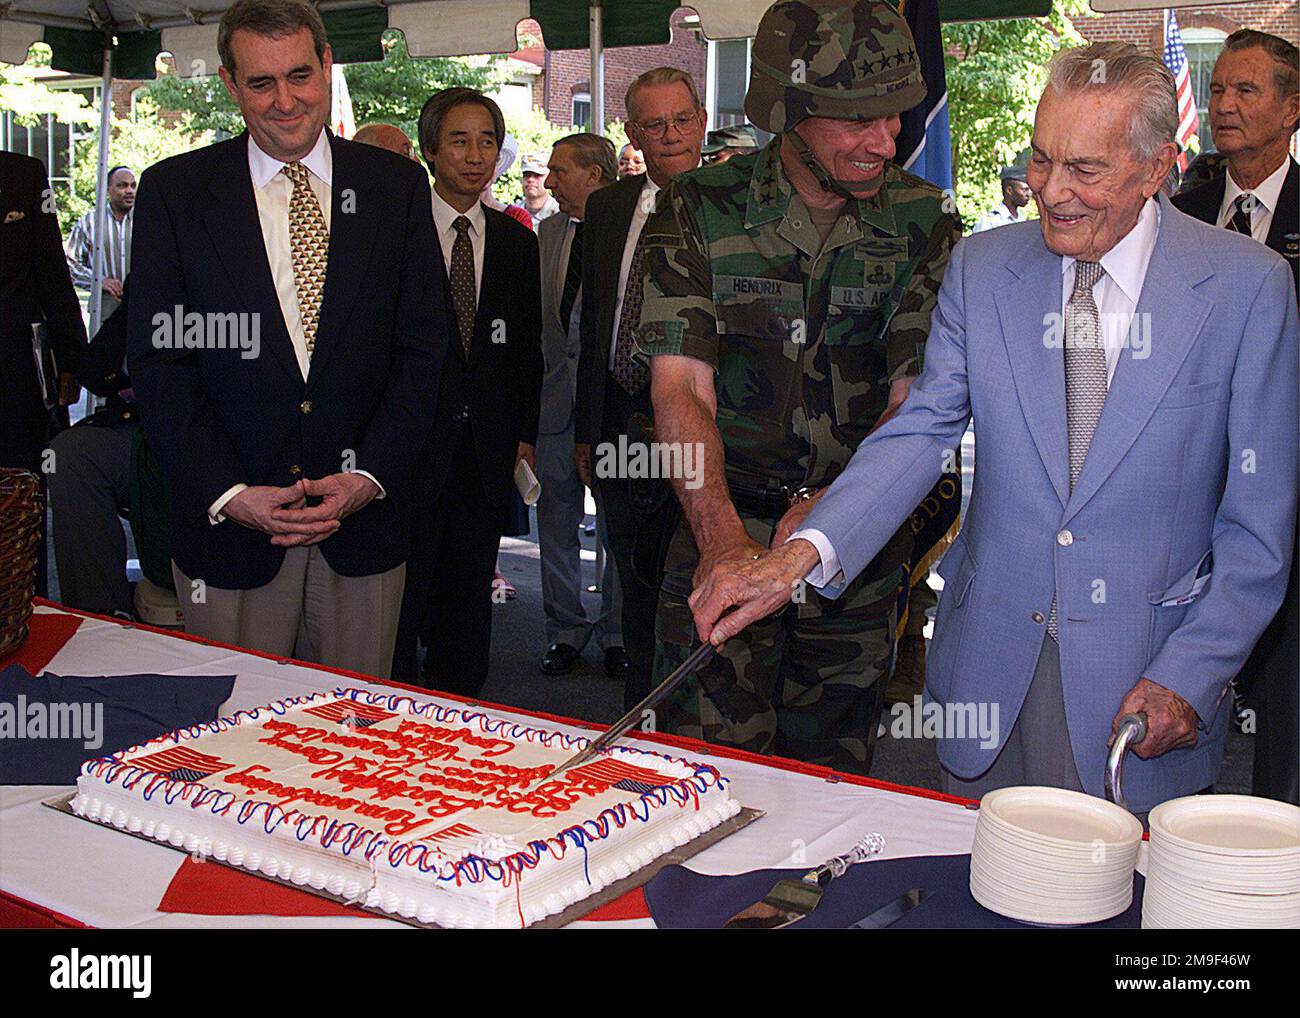 US Army General John W. Hendrix, Commanding General Forces Command, and US Army Lieutenant General (retired) Louis W. Truman, oldest living Korean War veteran and former 3rd US Army Commander, cut the birthday cake for the 225th Army birthday and 50th anniversary of the Korean War. Watching from the left are Mr. Gaden Thompson, Deputy Undersecretary of the Army for International Affairs and Mr. Kwang-Sok Ryu, Consul General of the Republic of Korea in Atlanta. Base: Fort Mcpherson State: Georgia (GA) Country: United States Of America (USA) Stock Photo